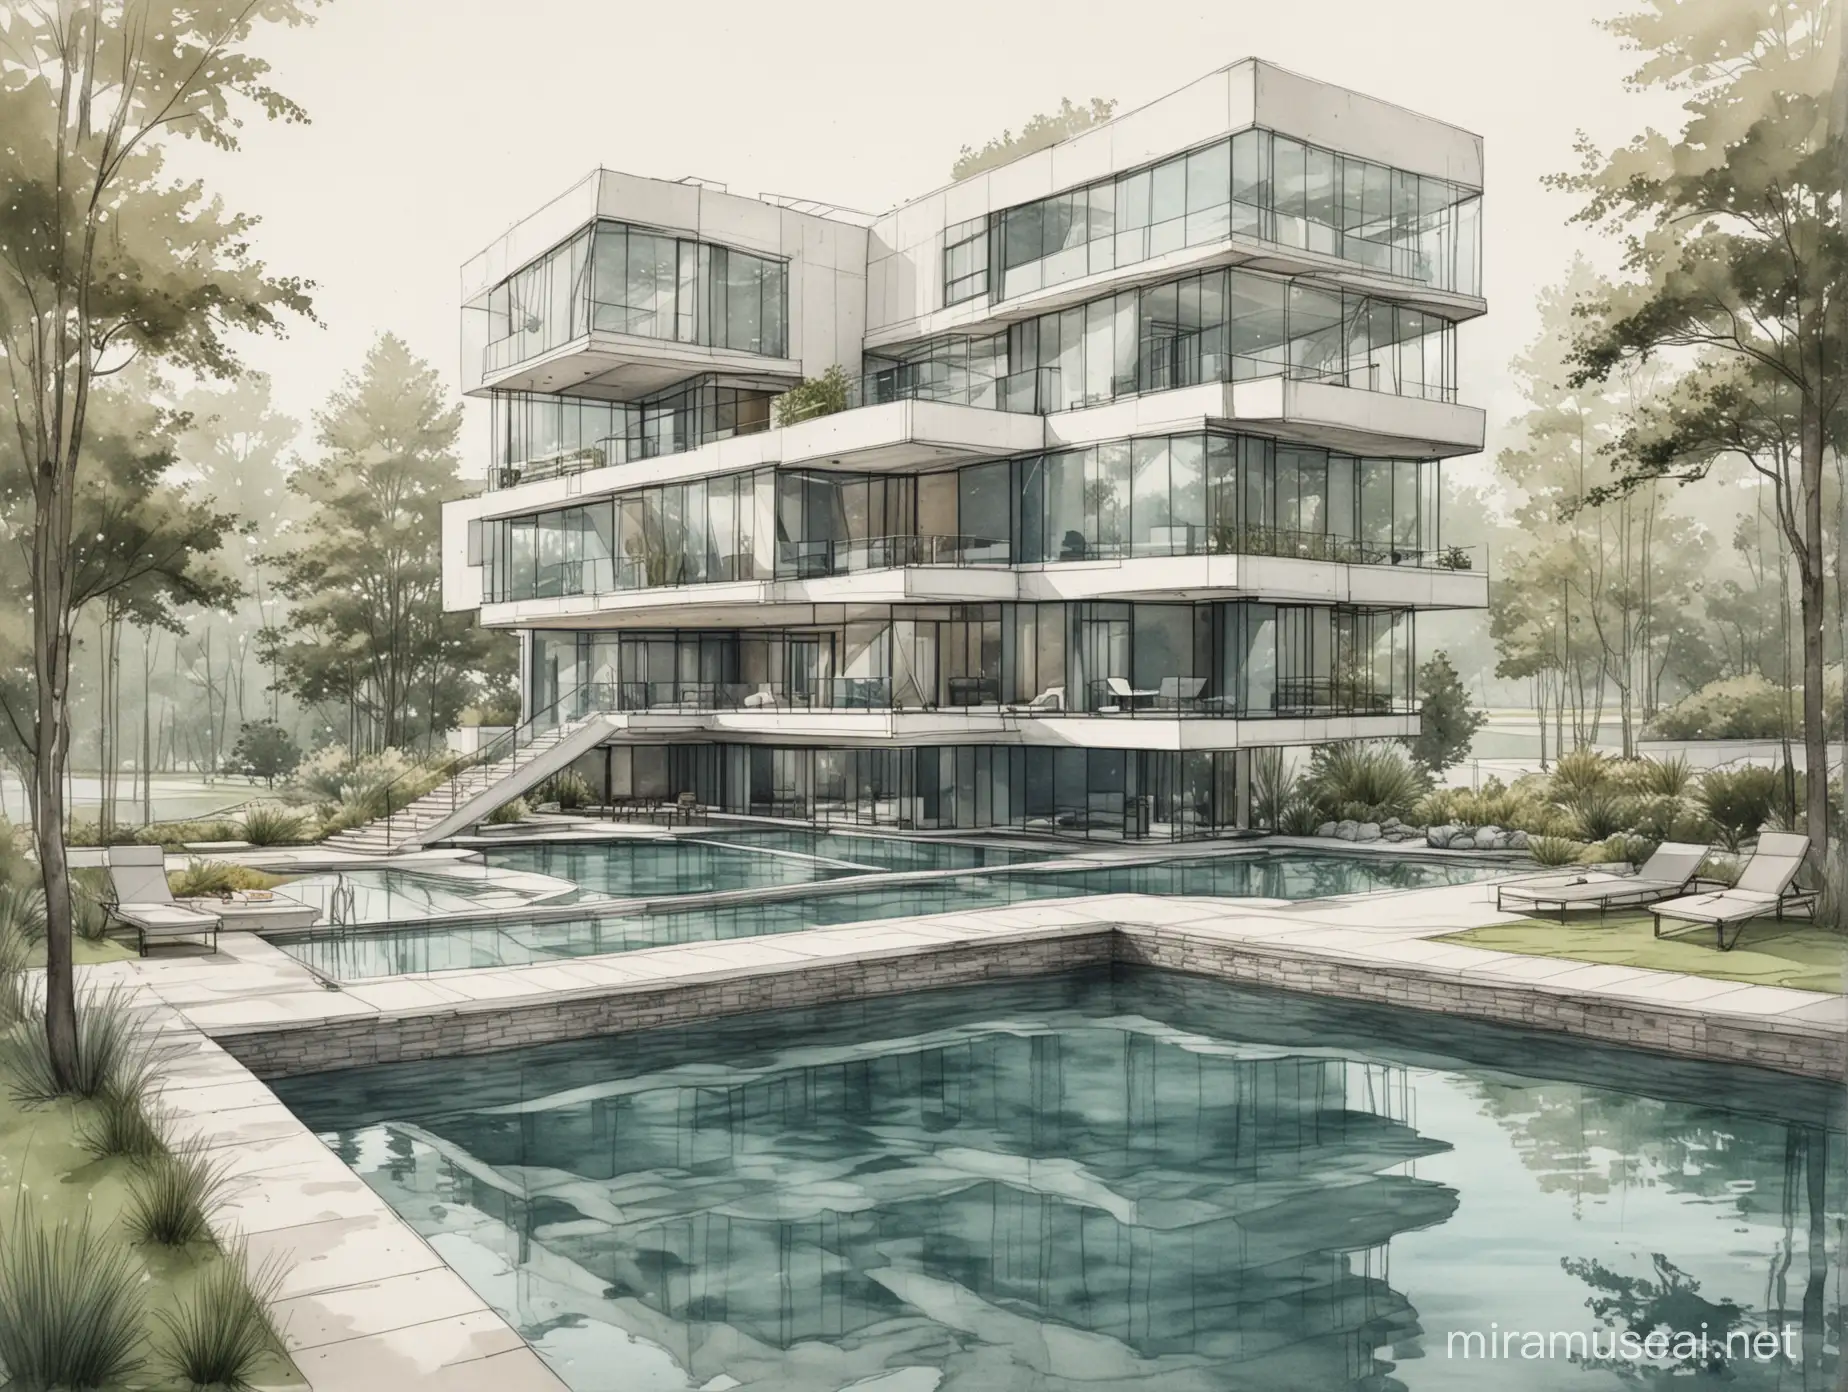 COULD YOU SKETCH FOUR FLOOR MODERN BUILDING WITH OUTDOOR POND CONNECTED TO INDOOR POOL. GEOMETRICAL SHAPES
